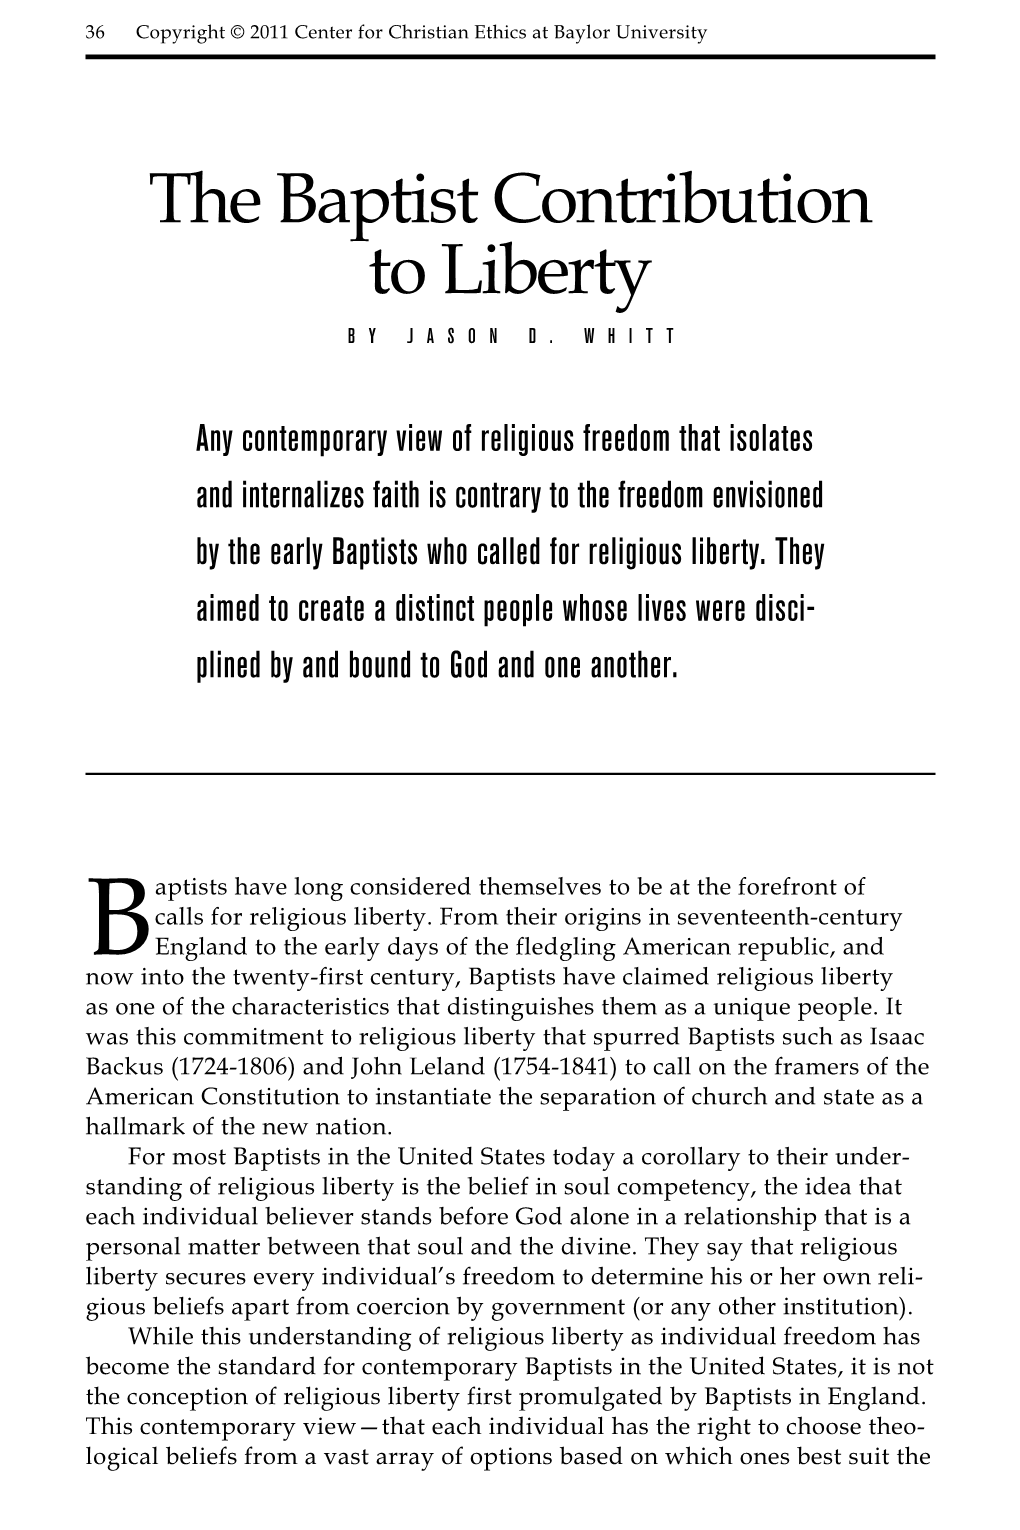 The Baptist Contribution to Liberty by Jason D